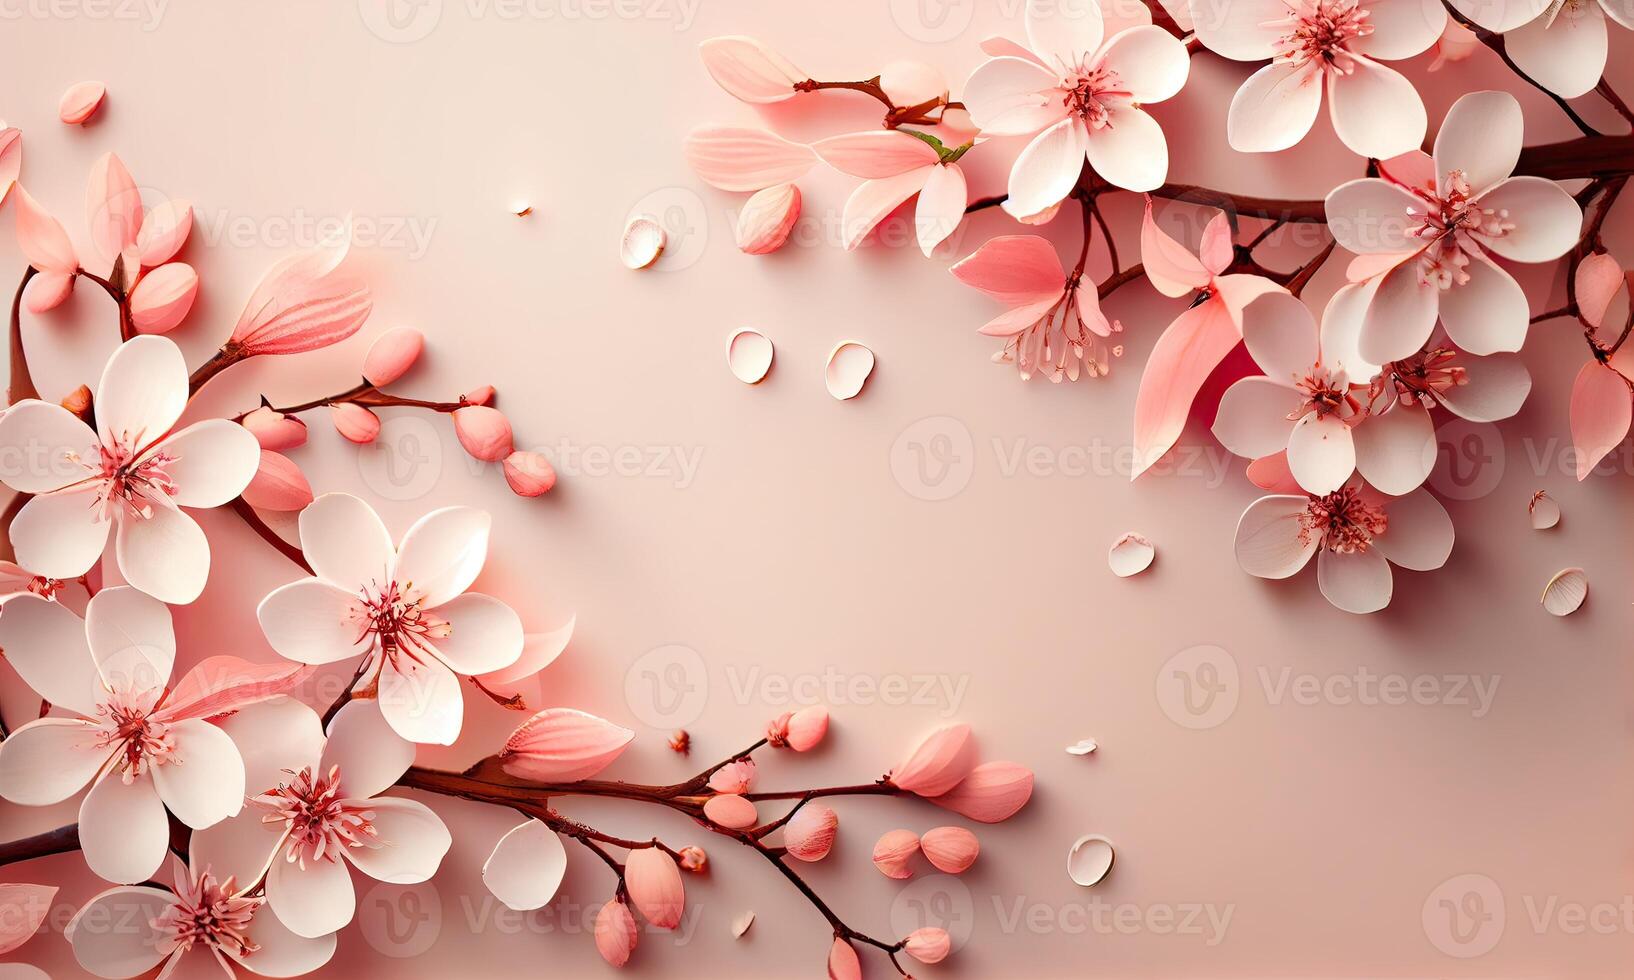 Dreamy cherry blossoms as a natural border,on pink background. Cherry flowers in small clusters on a cherry tree branch on pink background with copyspace. photo